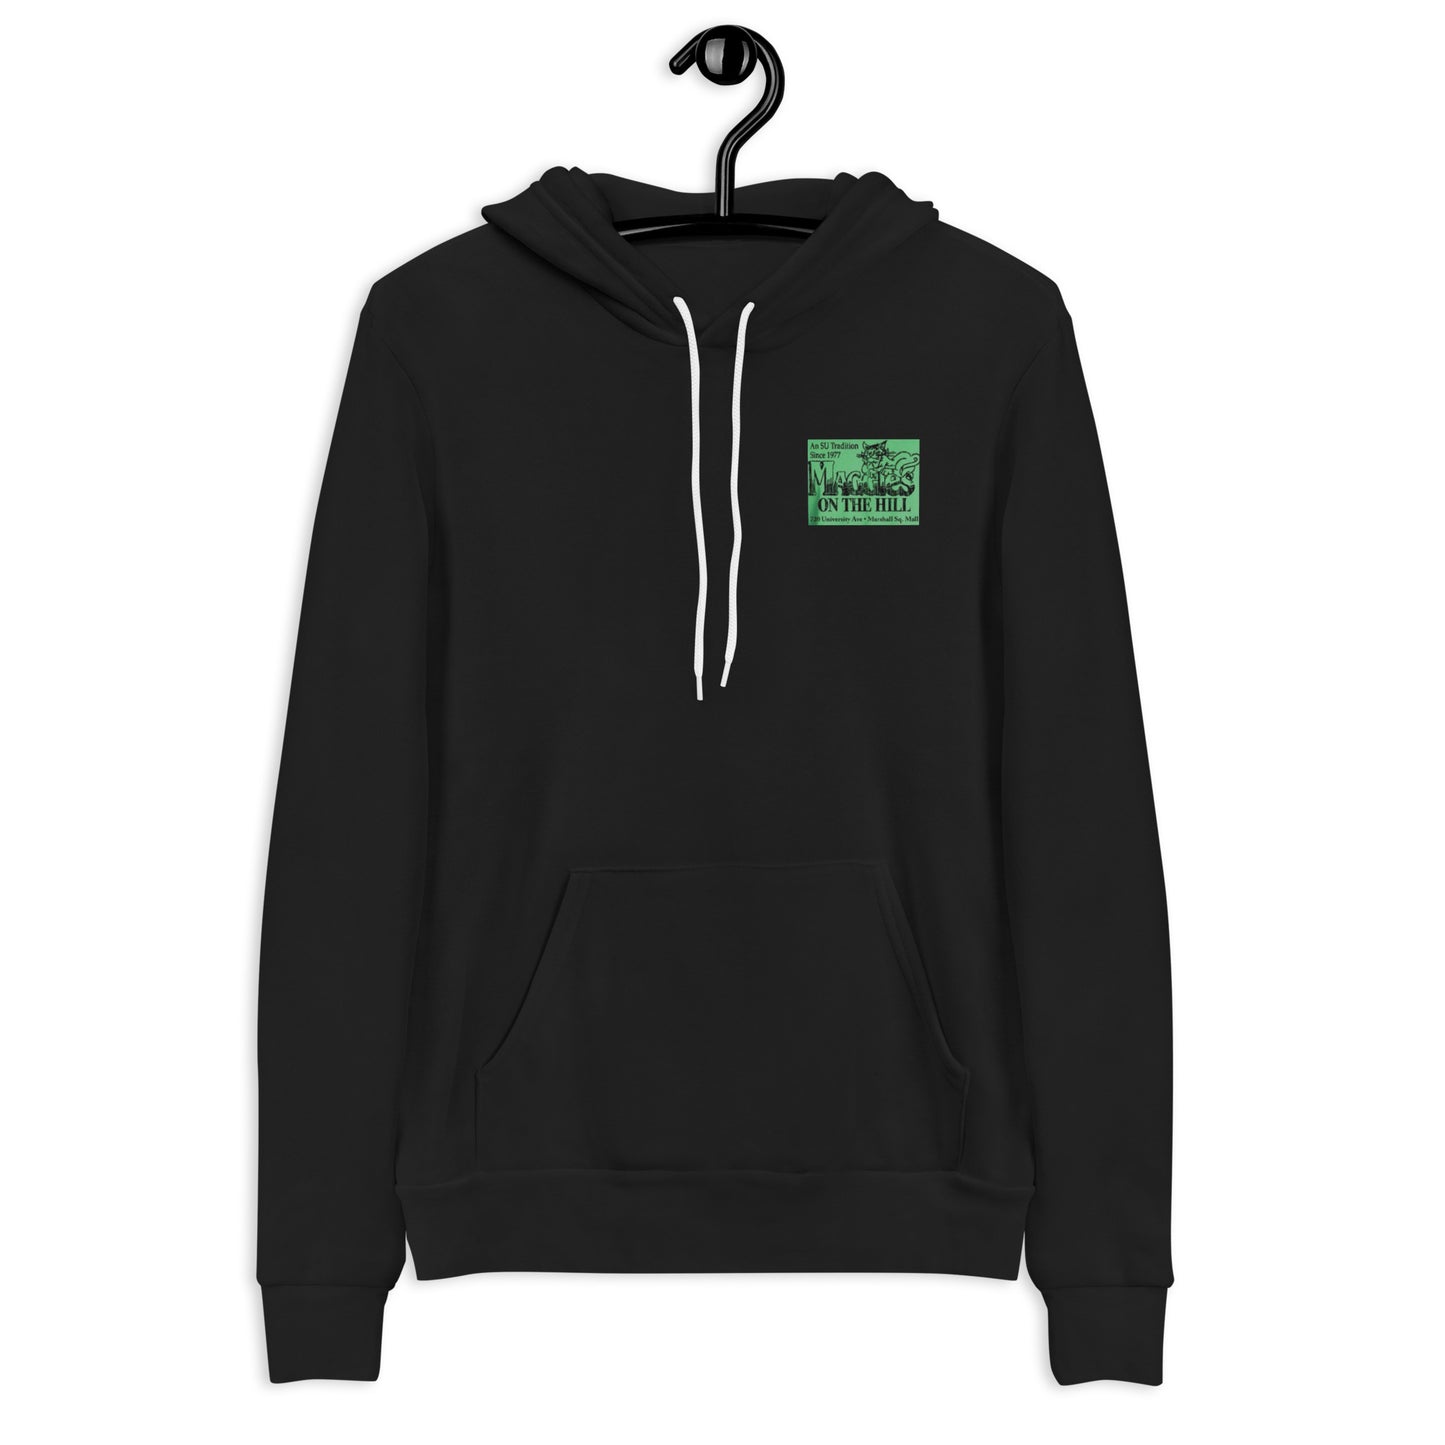 Black fleece blend unisex hoodie that says 'Maggie's on the Hill' 